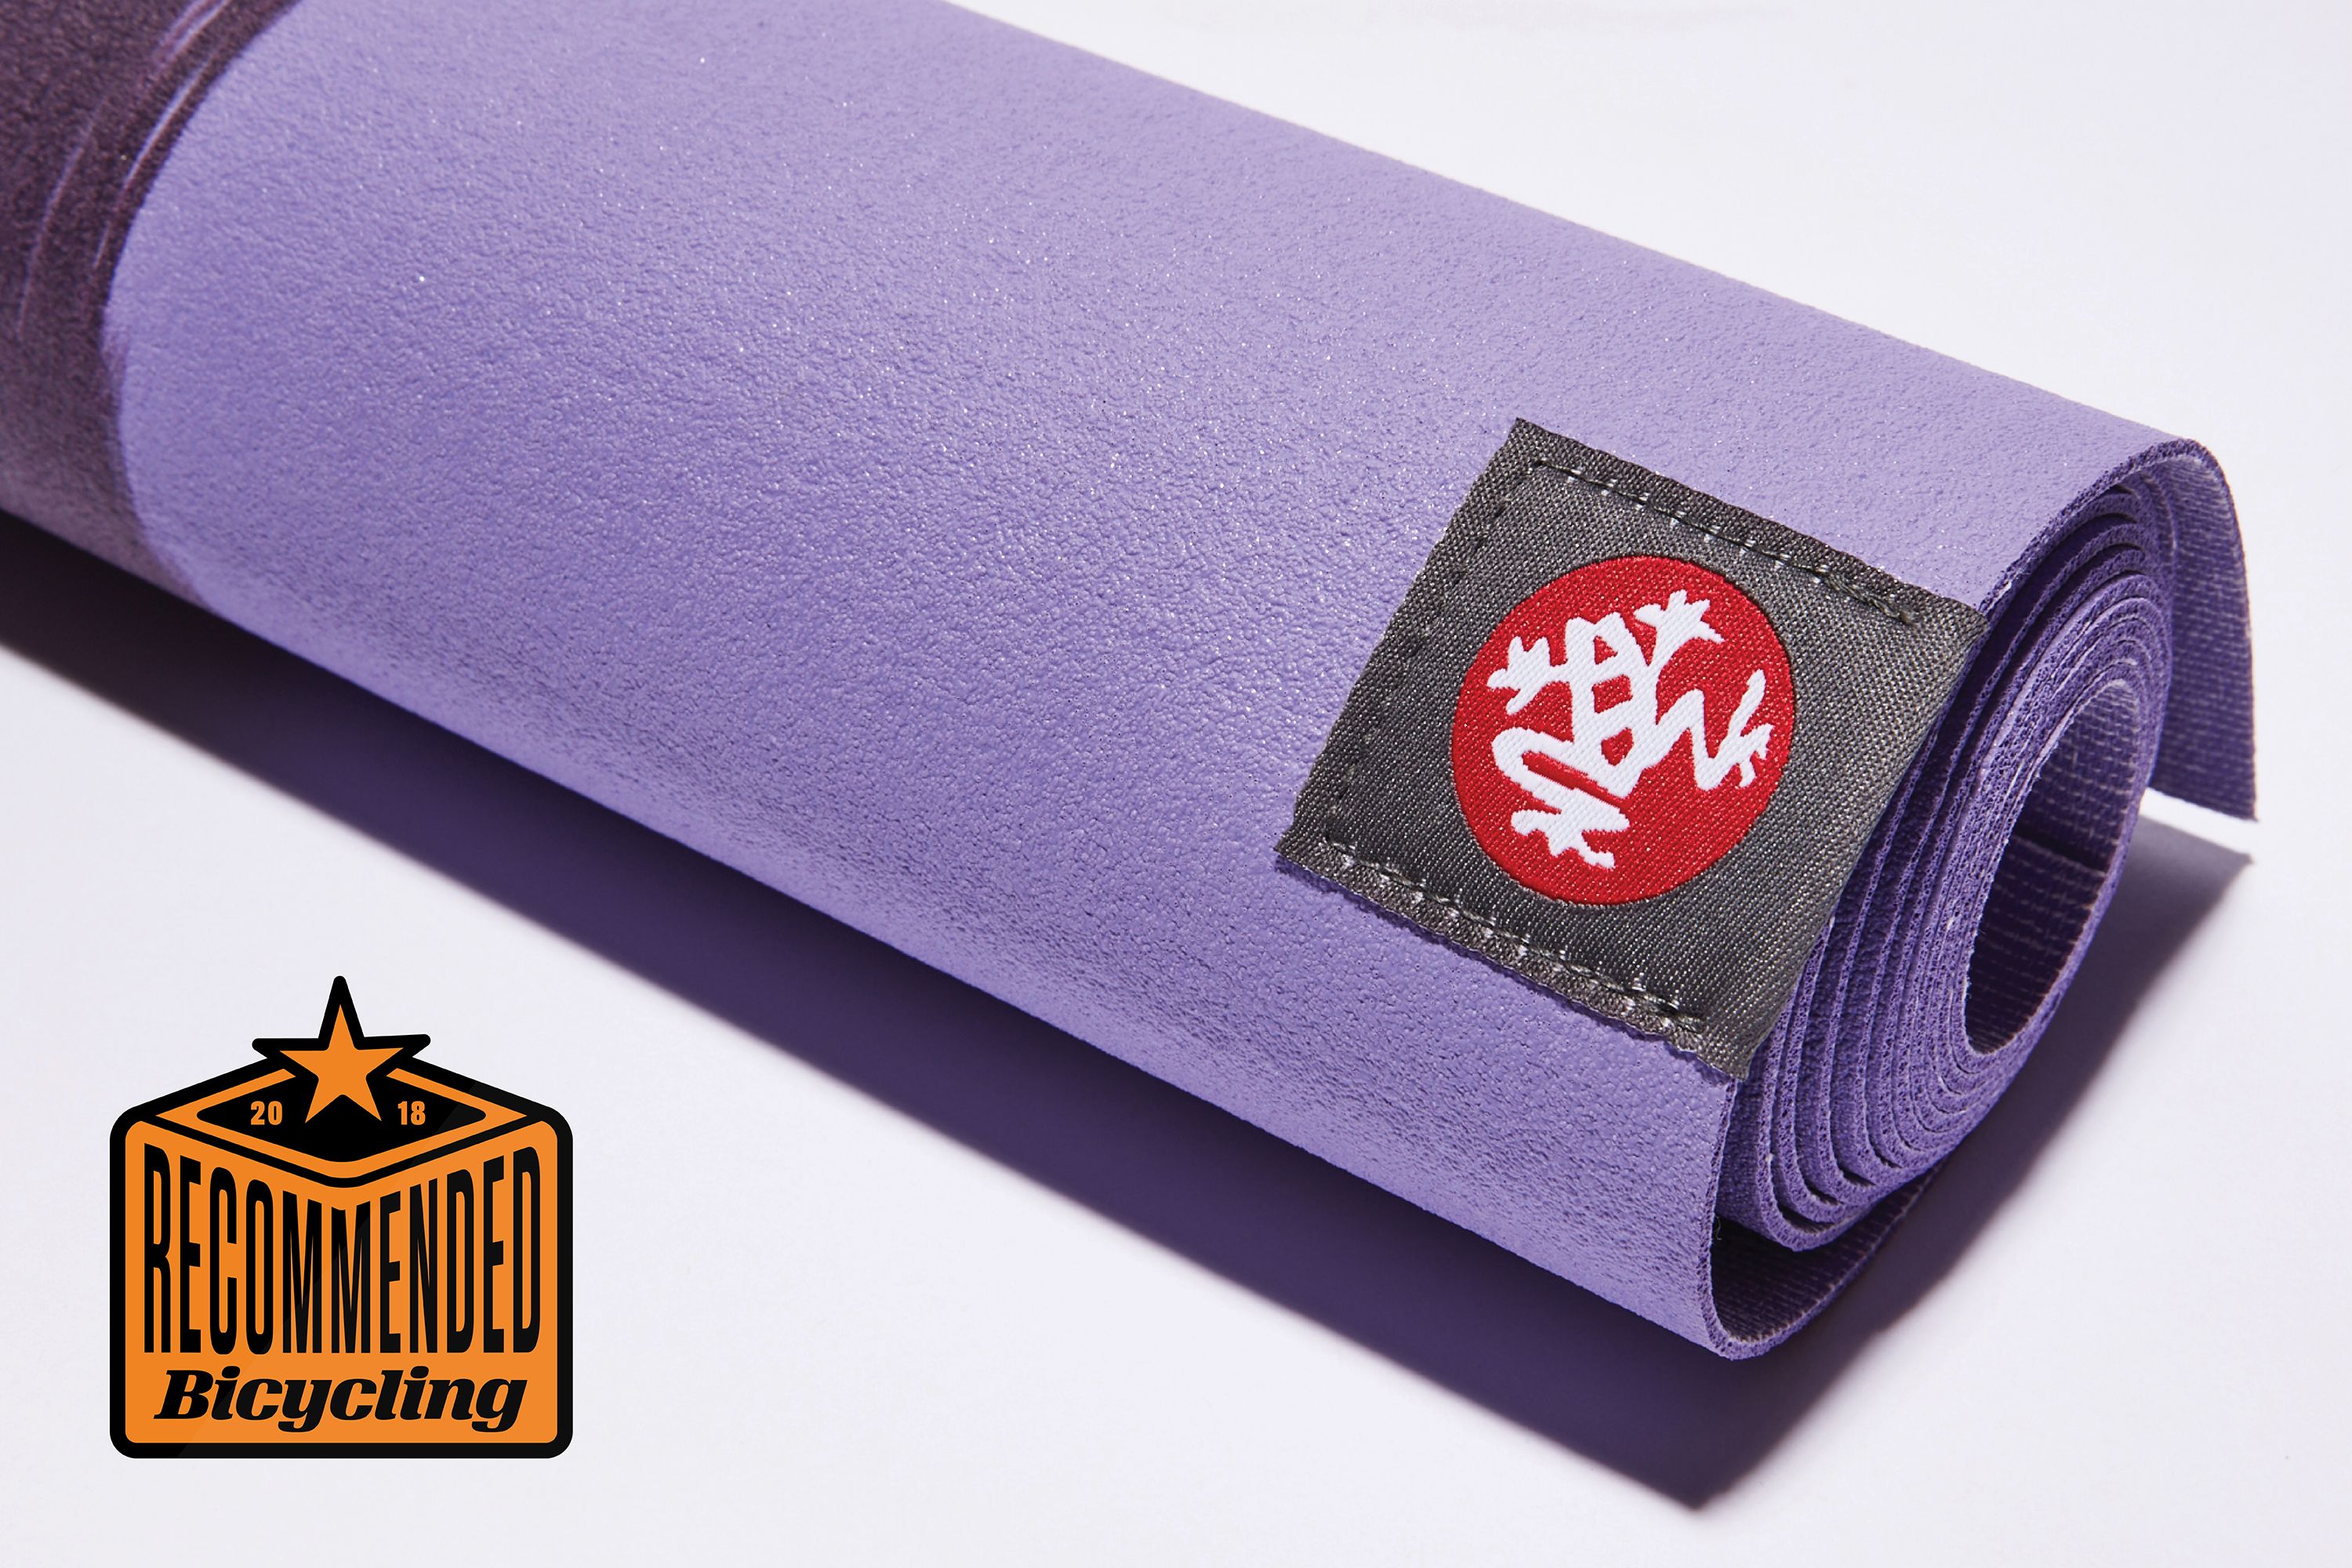 Best Yoga Mats for Cyclists - Reviews for At-Home Yoga